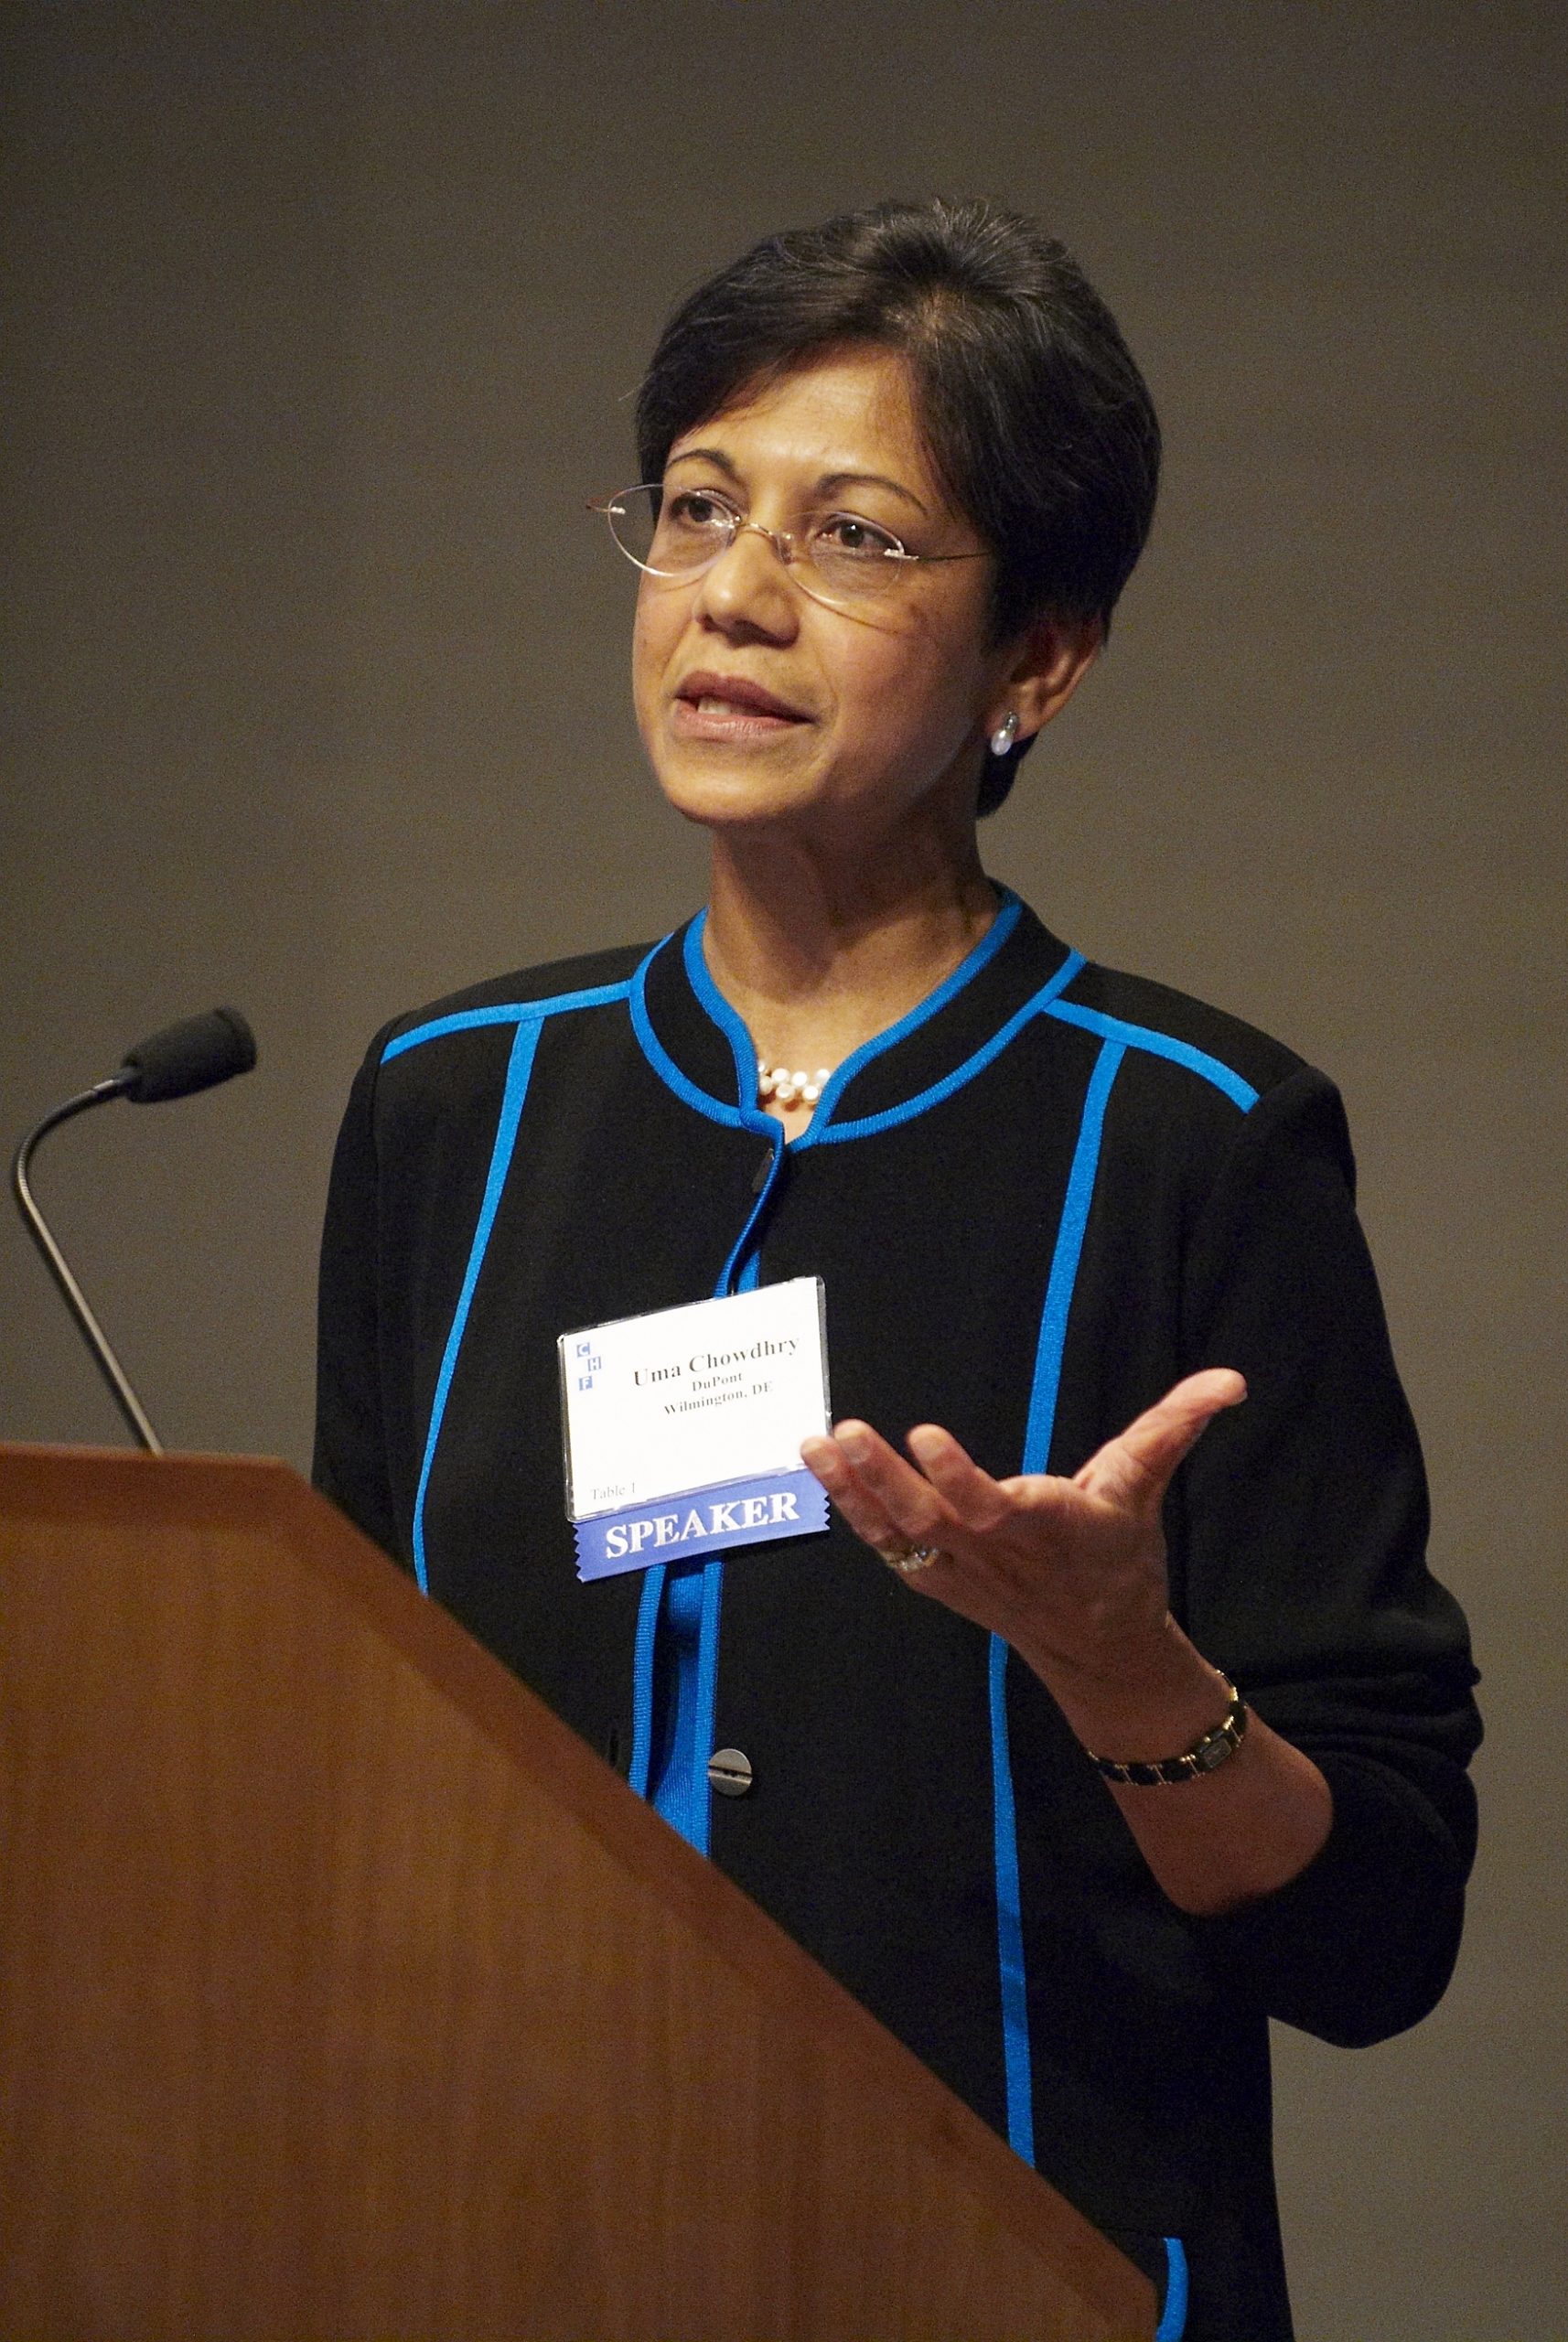 Photograph of Dr. Uma Chowdhry lecturing at a podium.